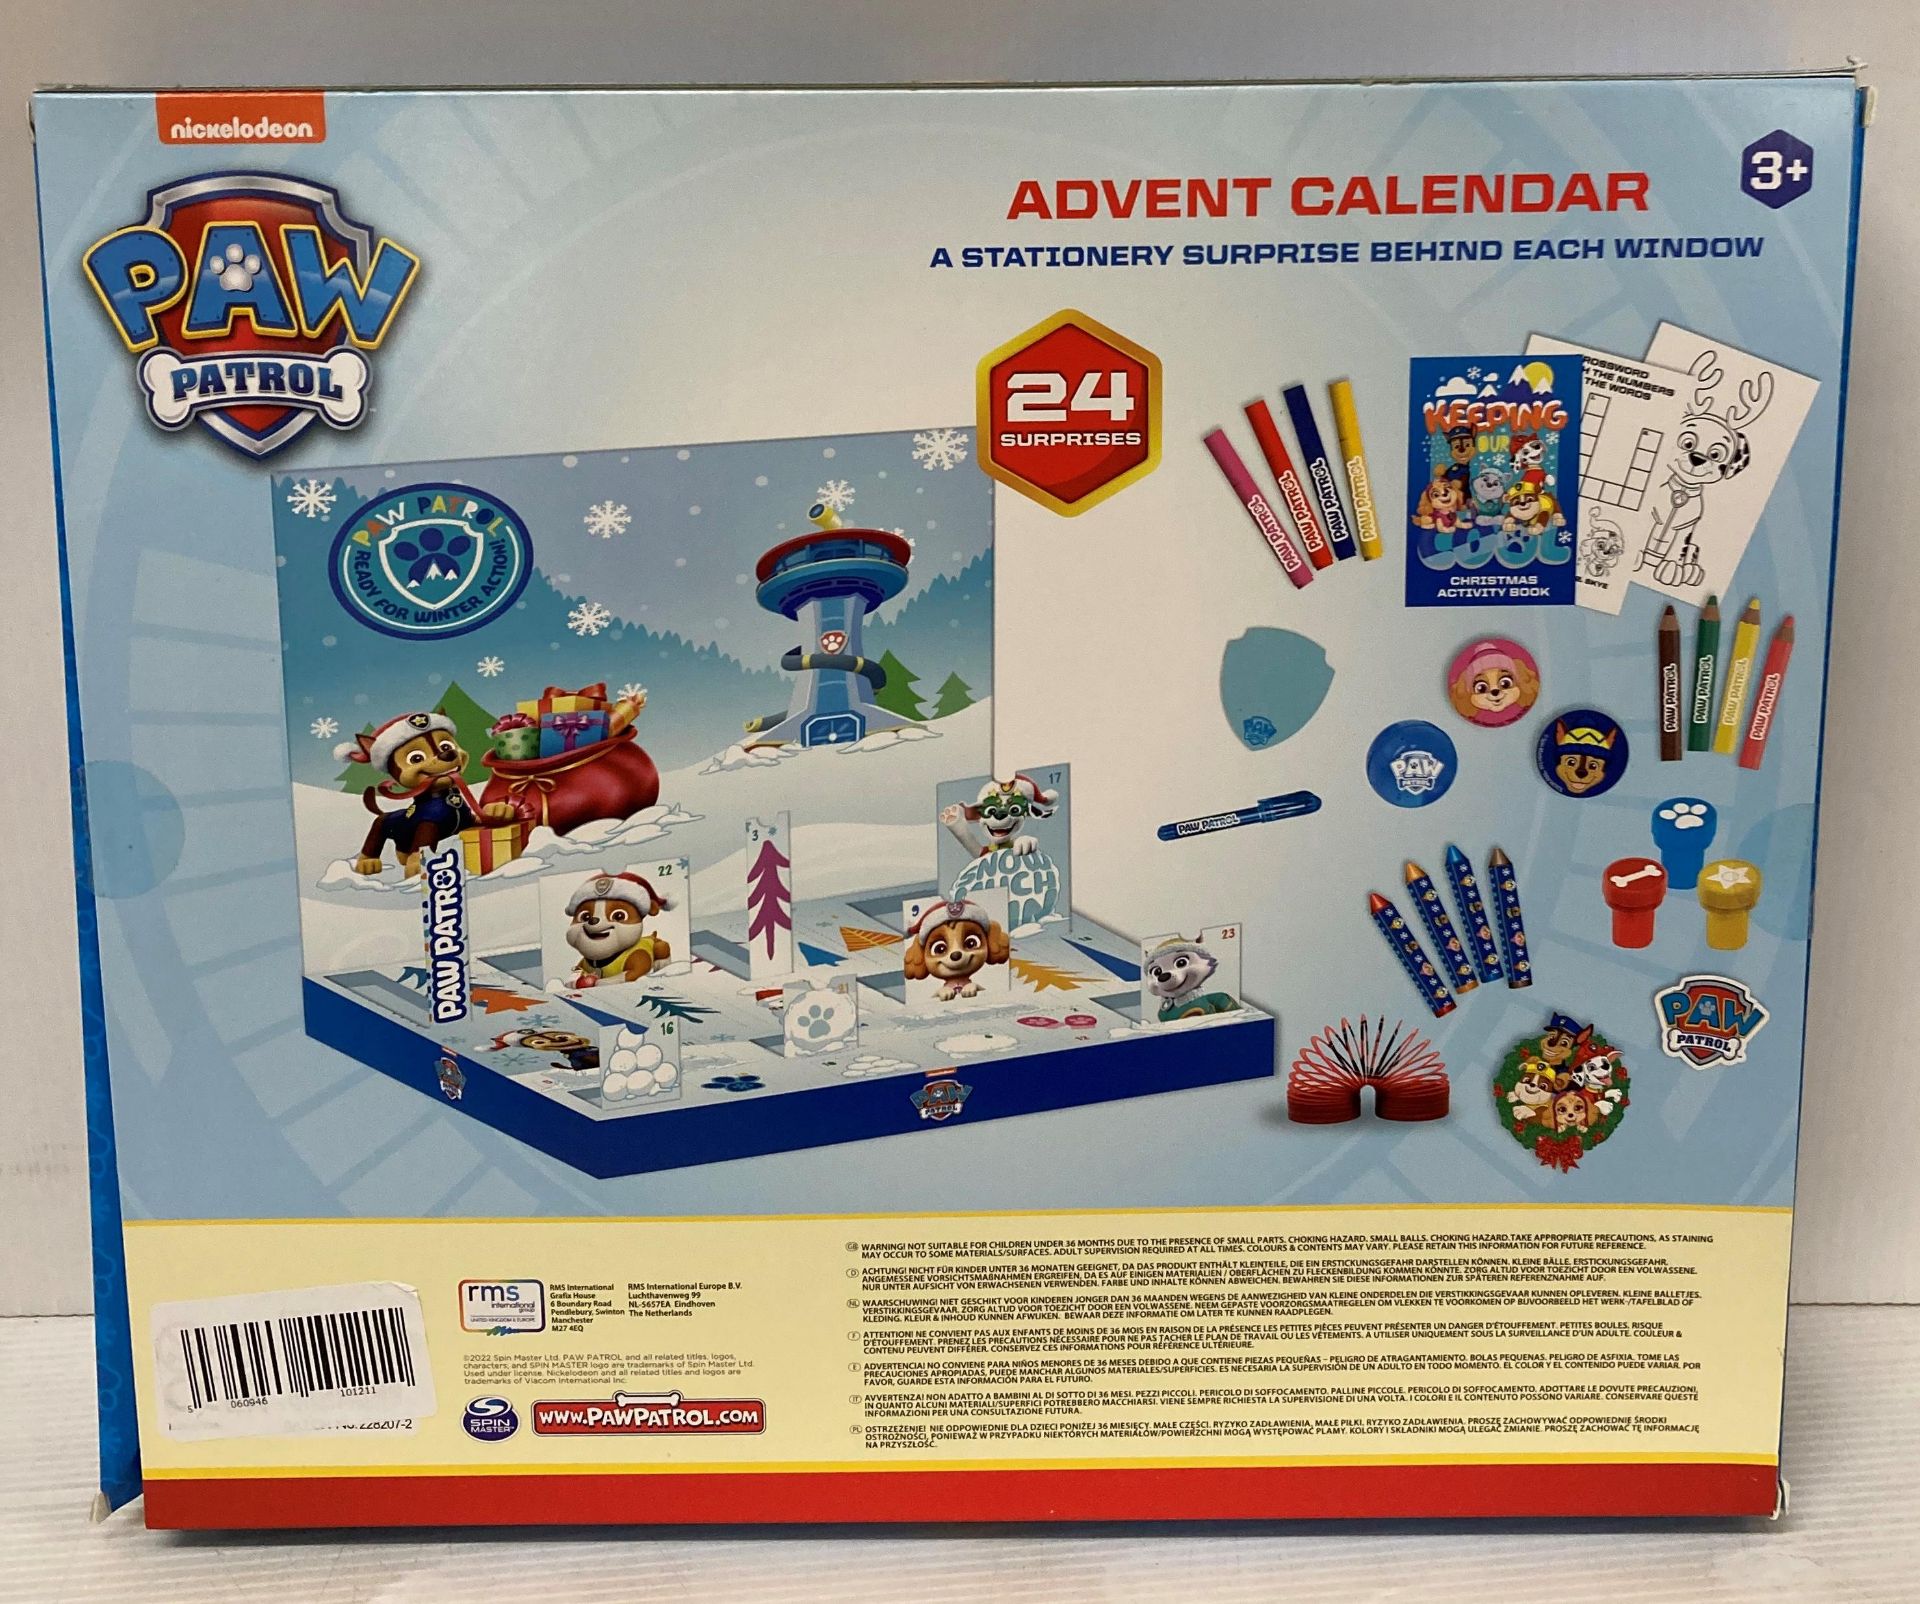 37 x Paw Patrol Advent Calendars (2 x outer boxes) (saleroom location: M05 floor) Further - Image 2 of 2